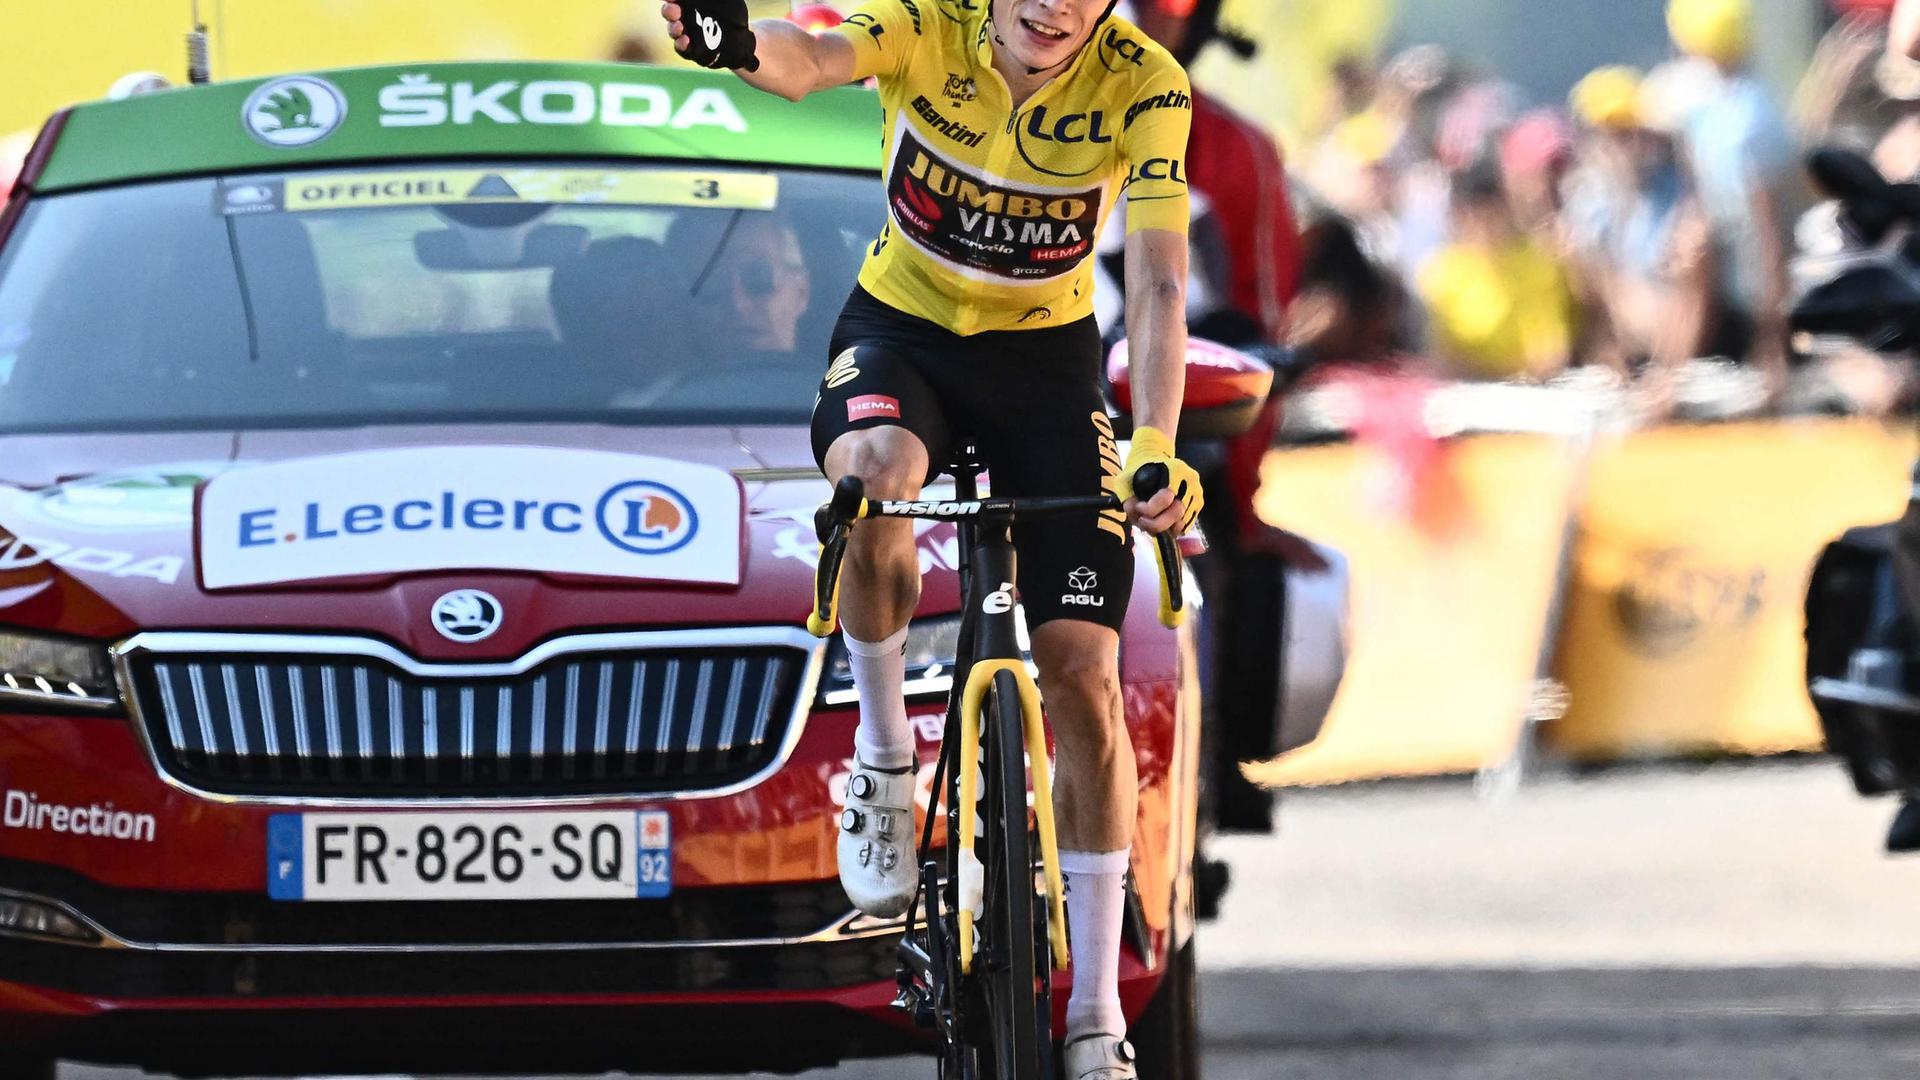 Jumbo-Visma team's Danish rider Jonas Vingegaard wearing the overall leader's yellow jersey celebrates as he cycles to the finish line to win the 18th stage of the 109th edition of the Tour de France cycling race, 143,2 km between Lourdes and Hautacam in the Pyrenees mountains in southwestern France, on July 21, 2022. (Photo by Marco BERTORELLO / AFP)